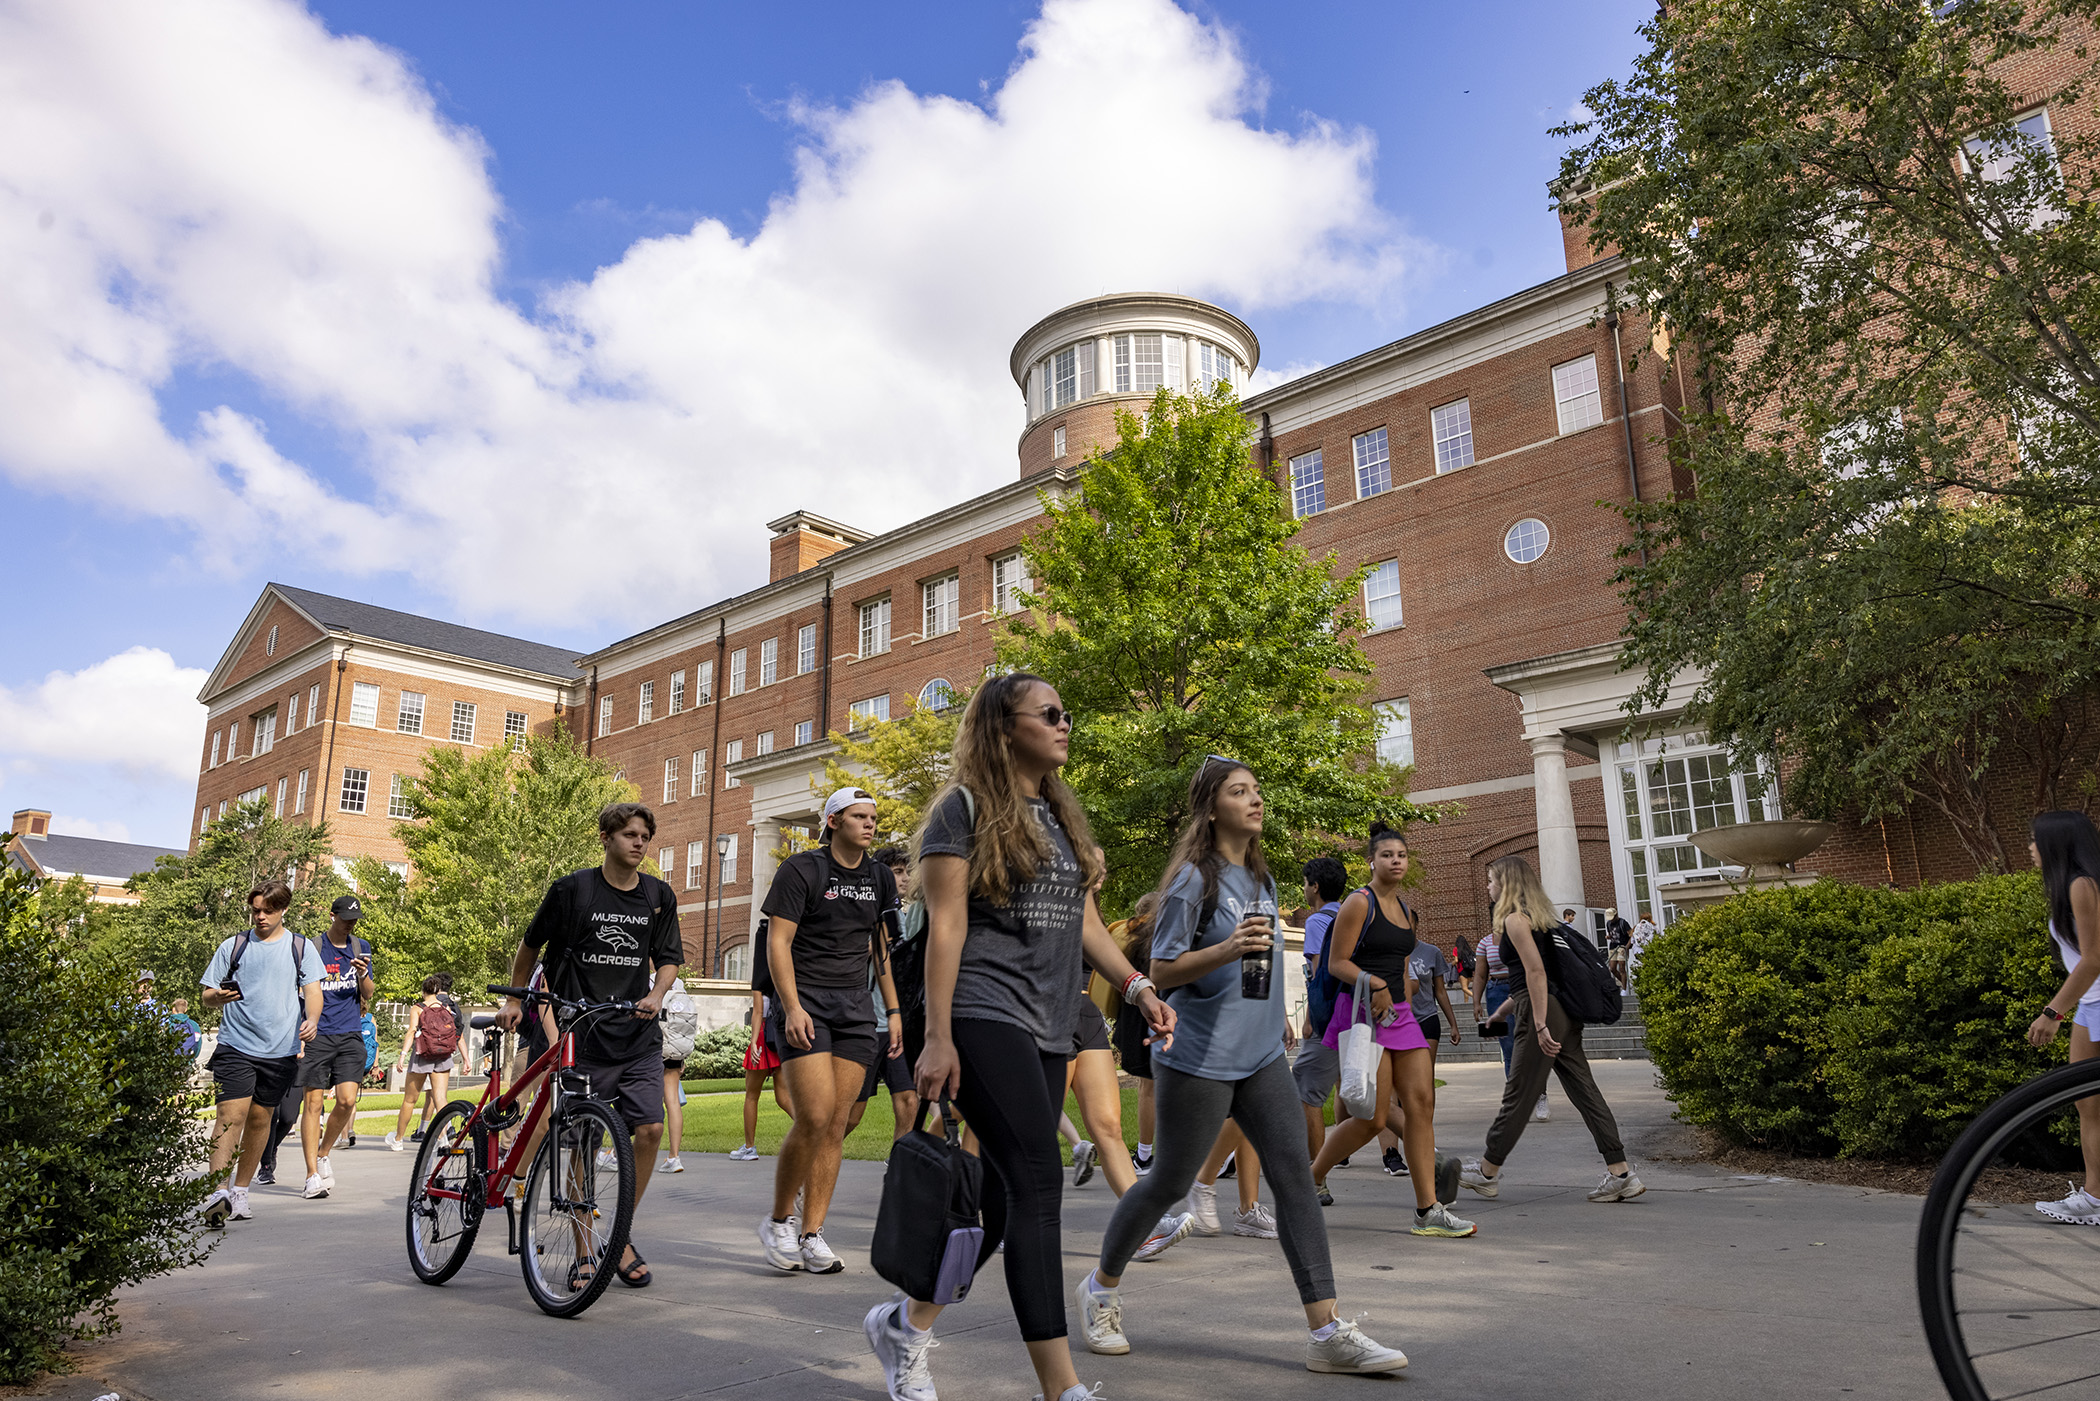 View of students walking on the sidewalk in front of the Miller Learning Center on a sunny summer day.